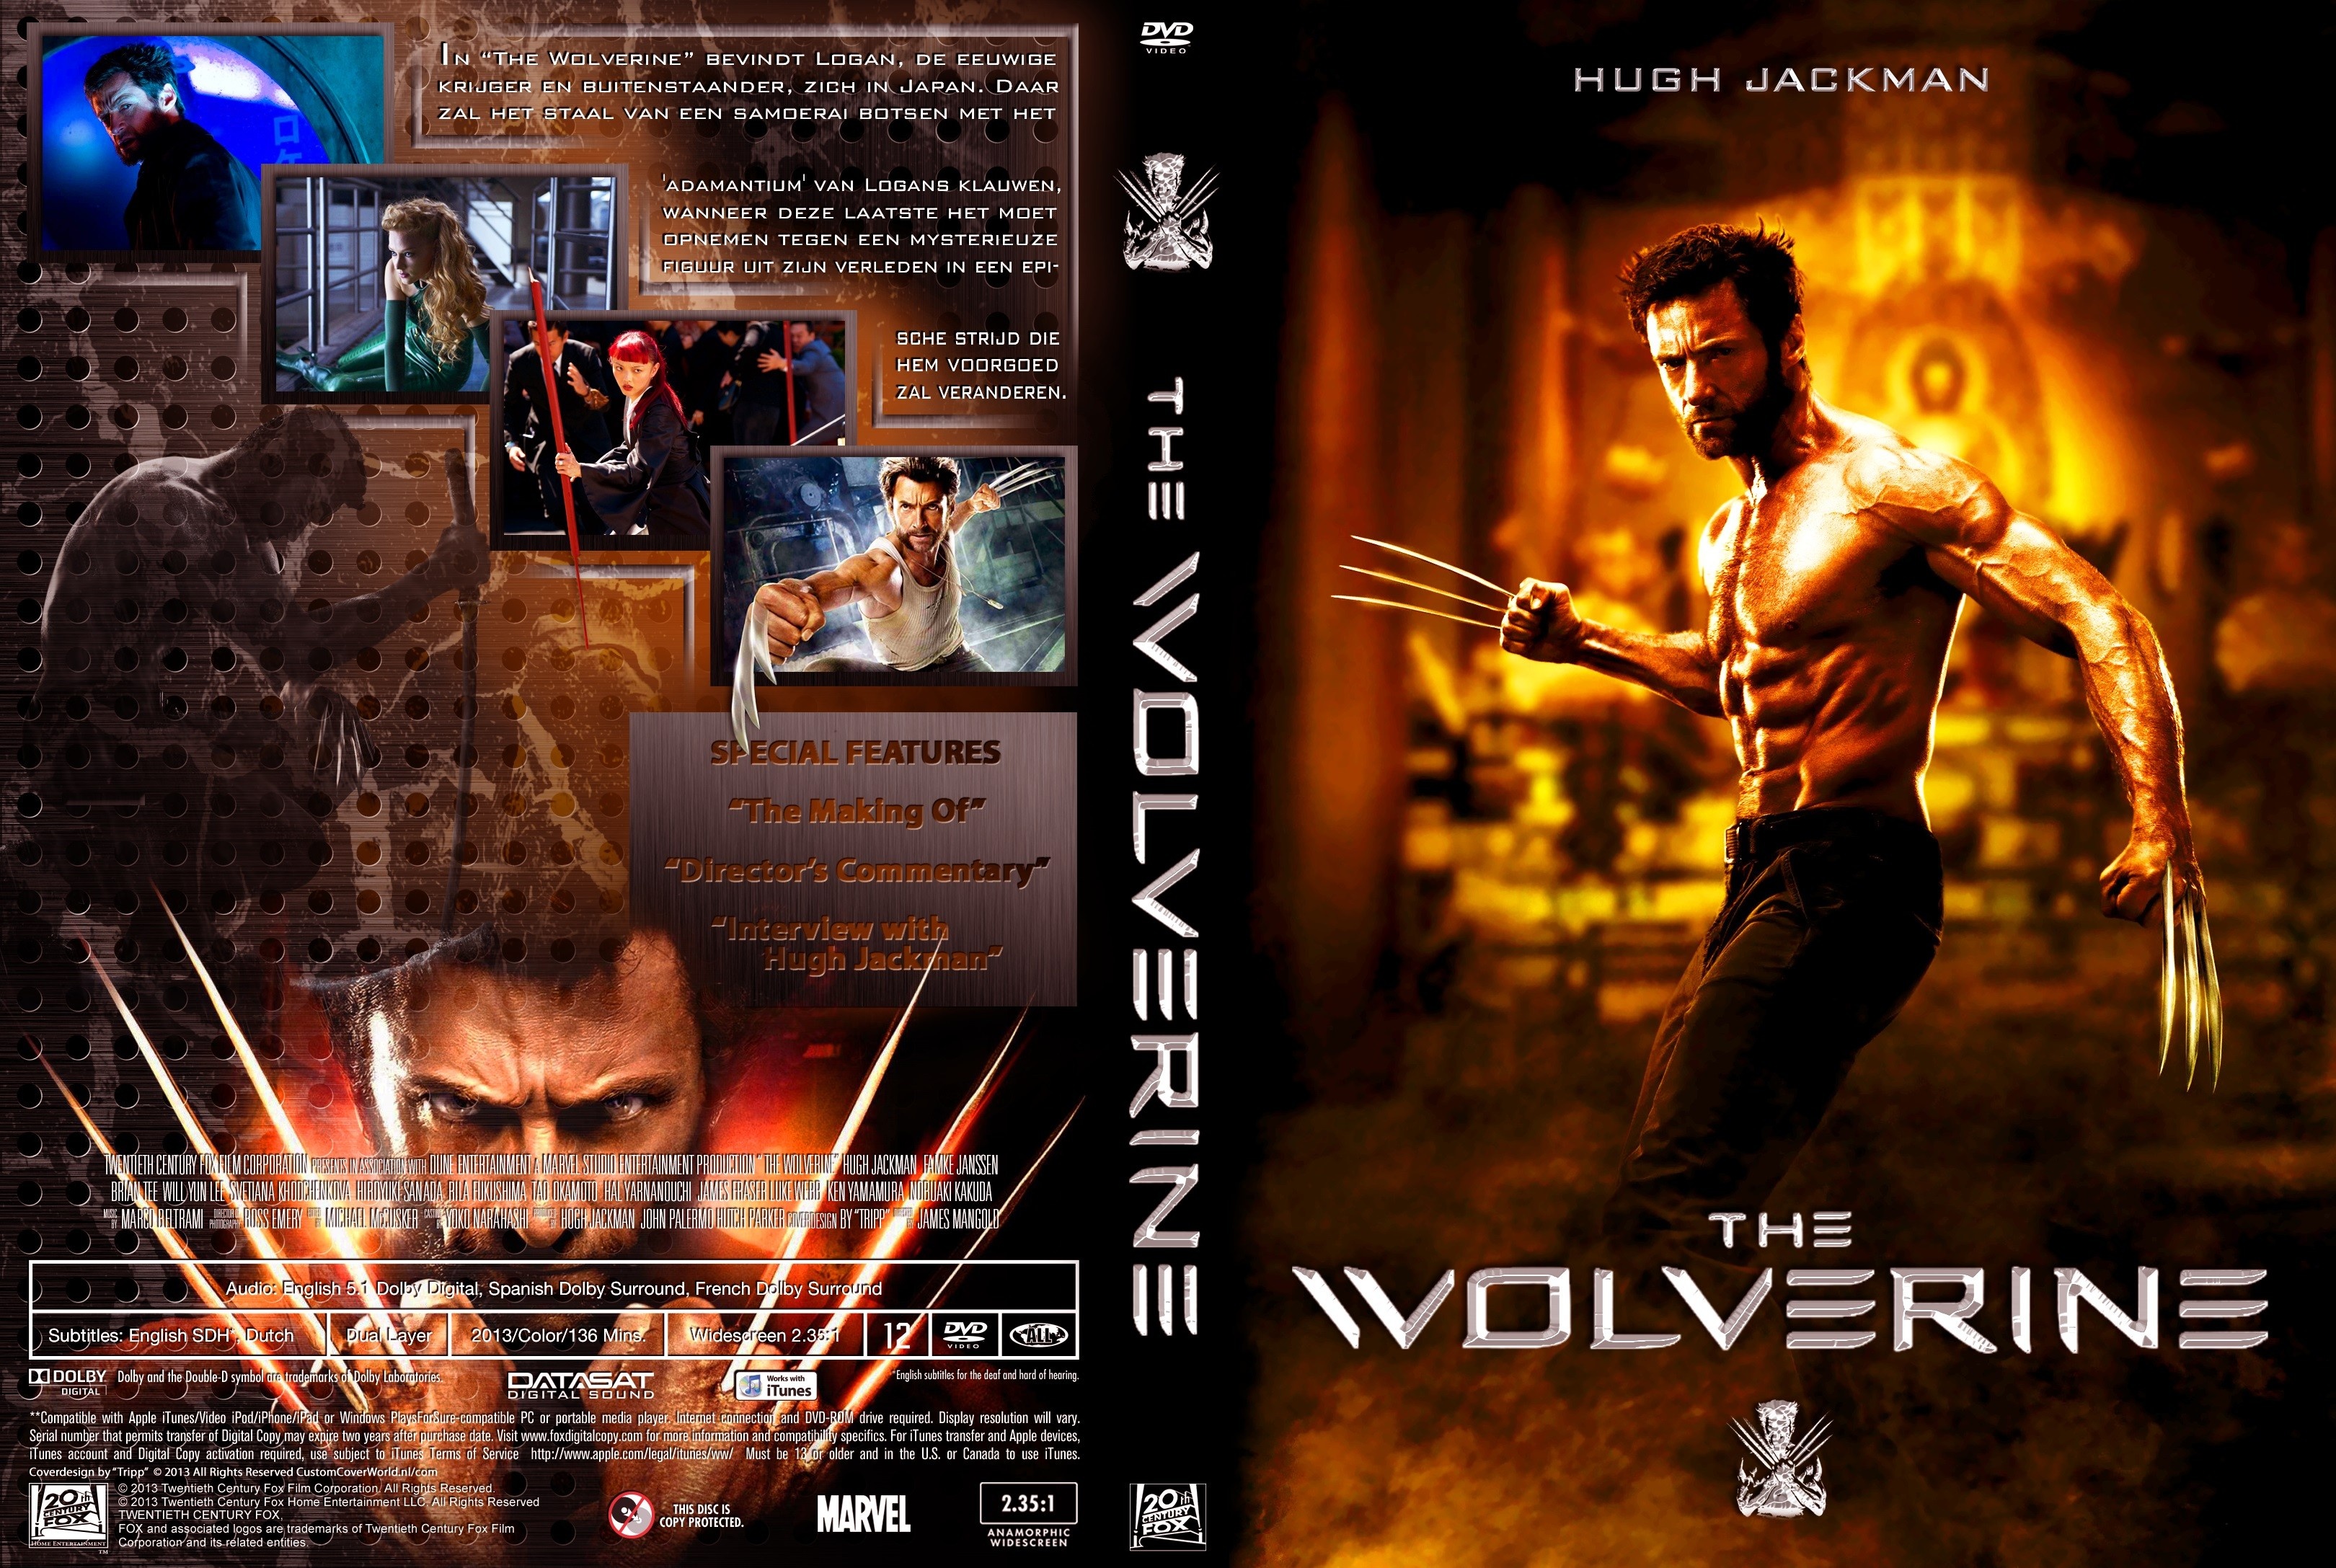 The Wolverine box cover